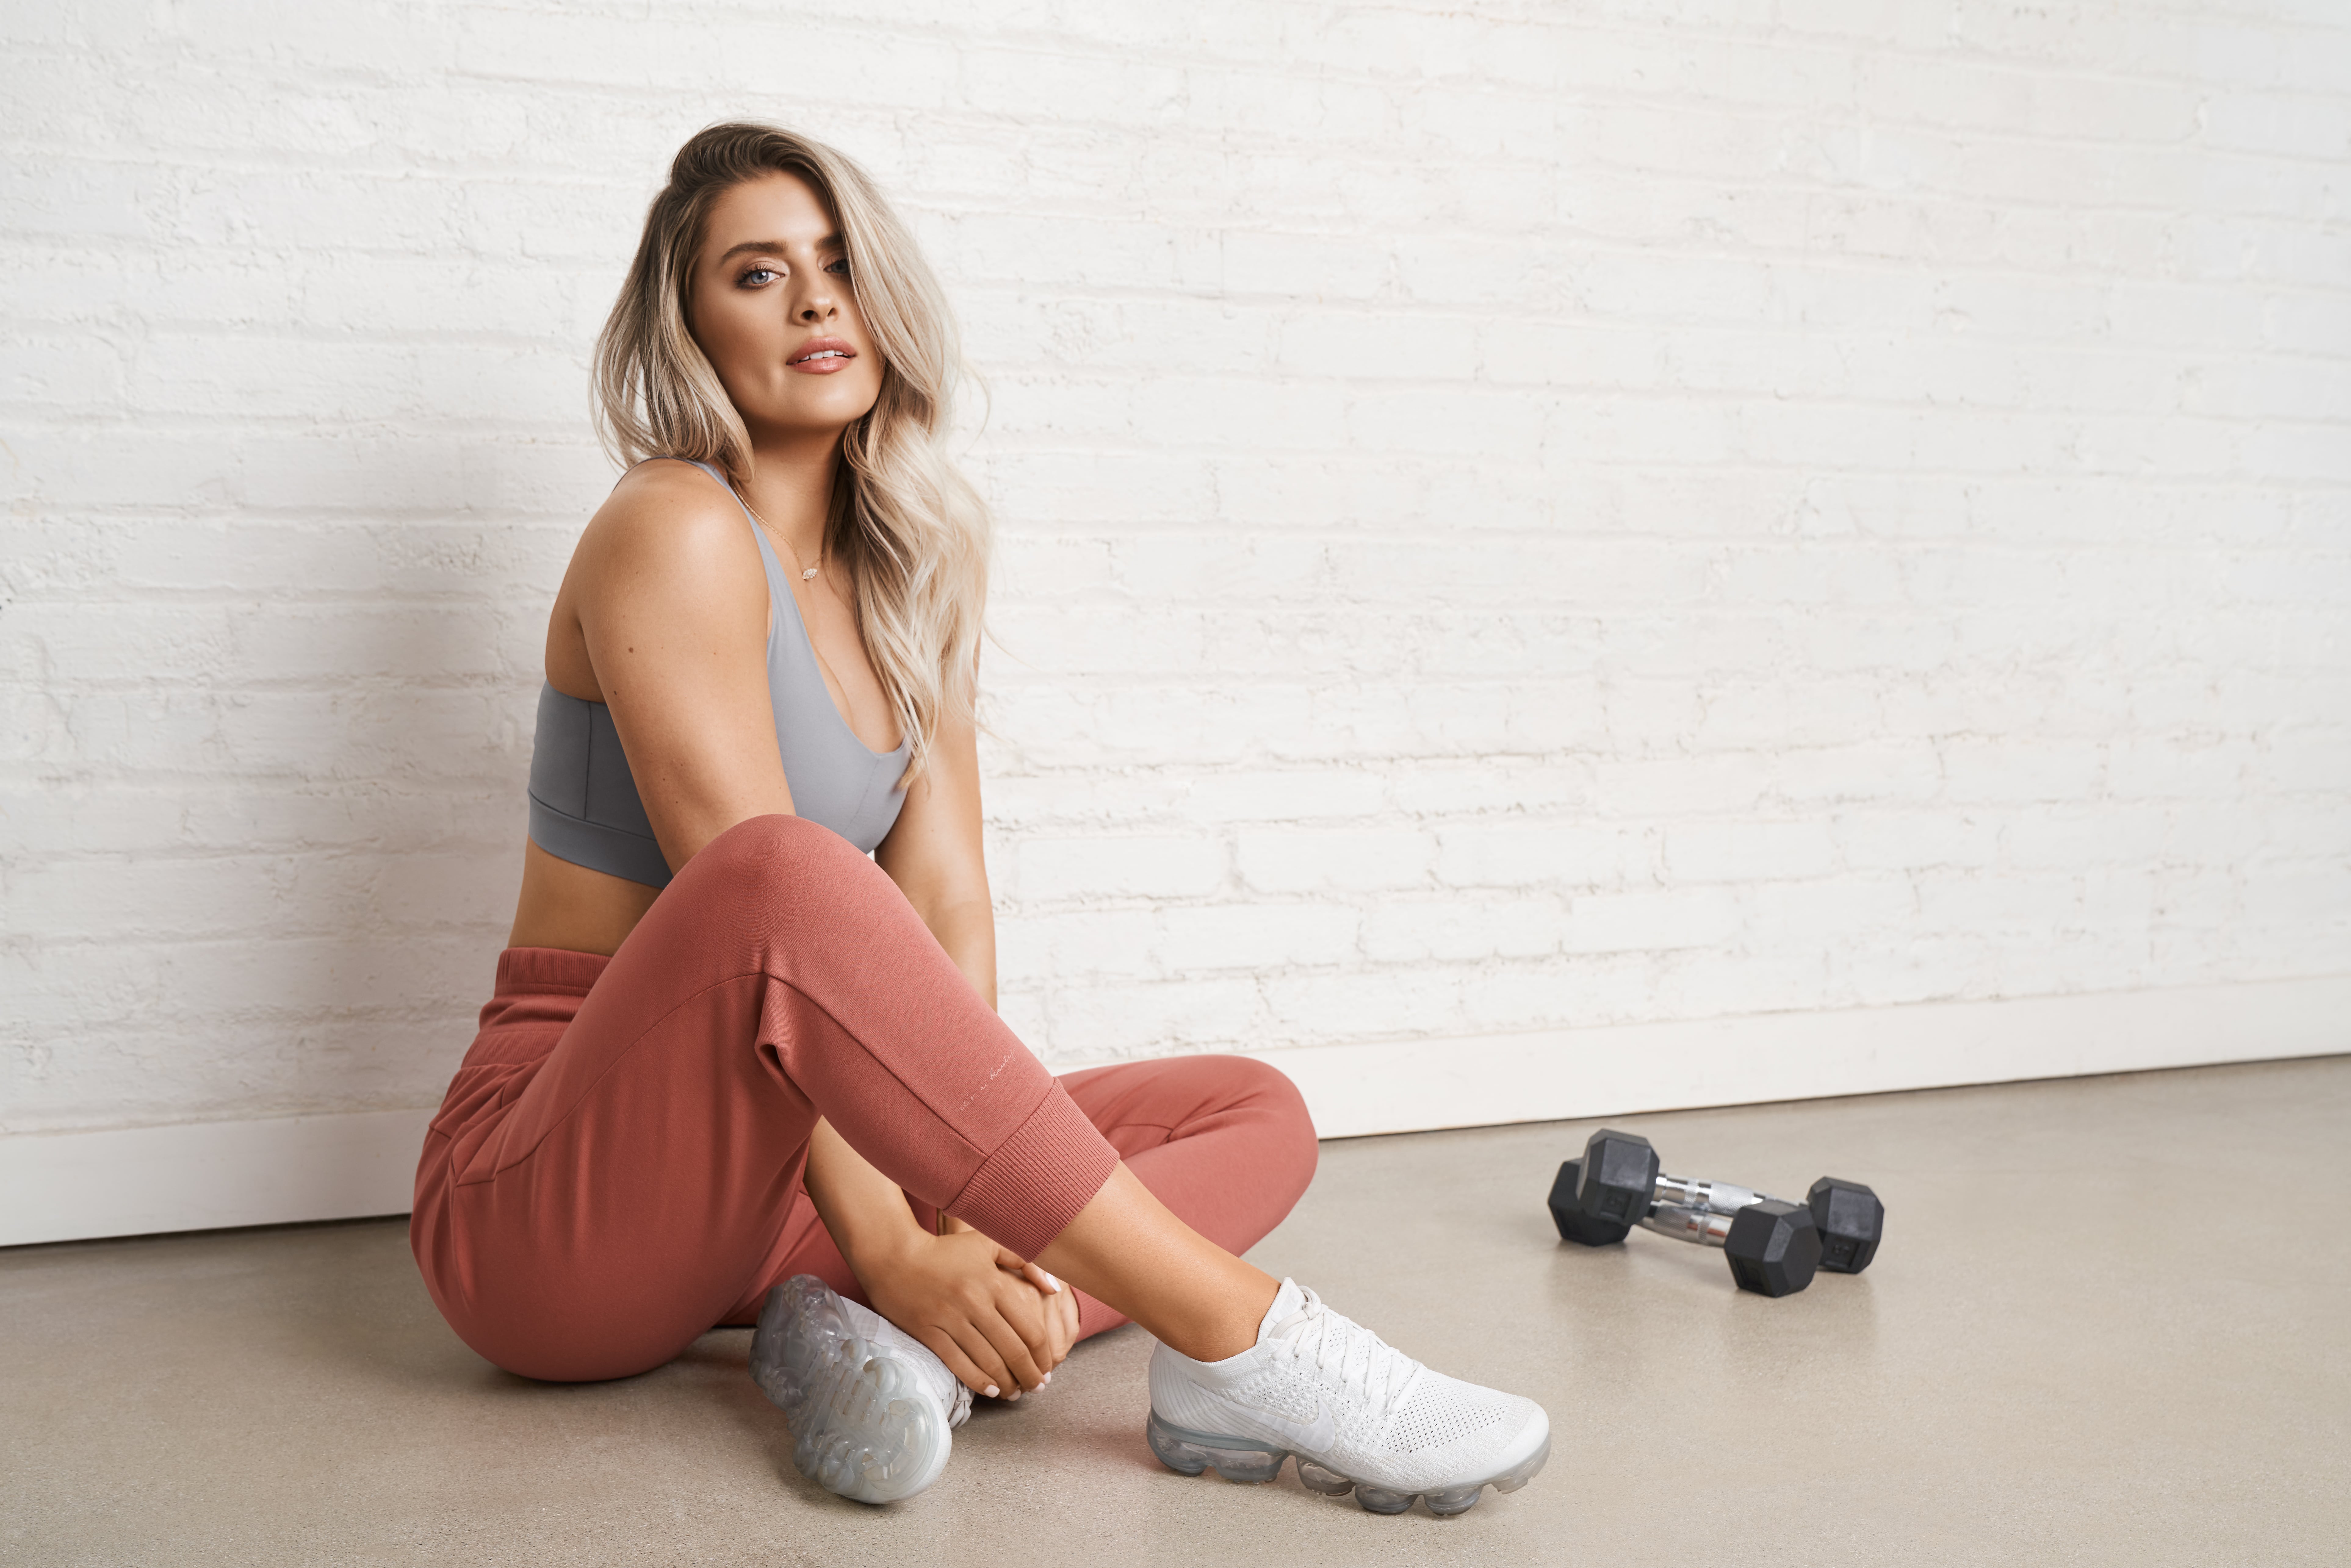 Gymshark X Whitney Simmons Drops New Collection